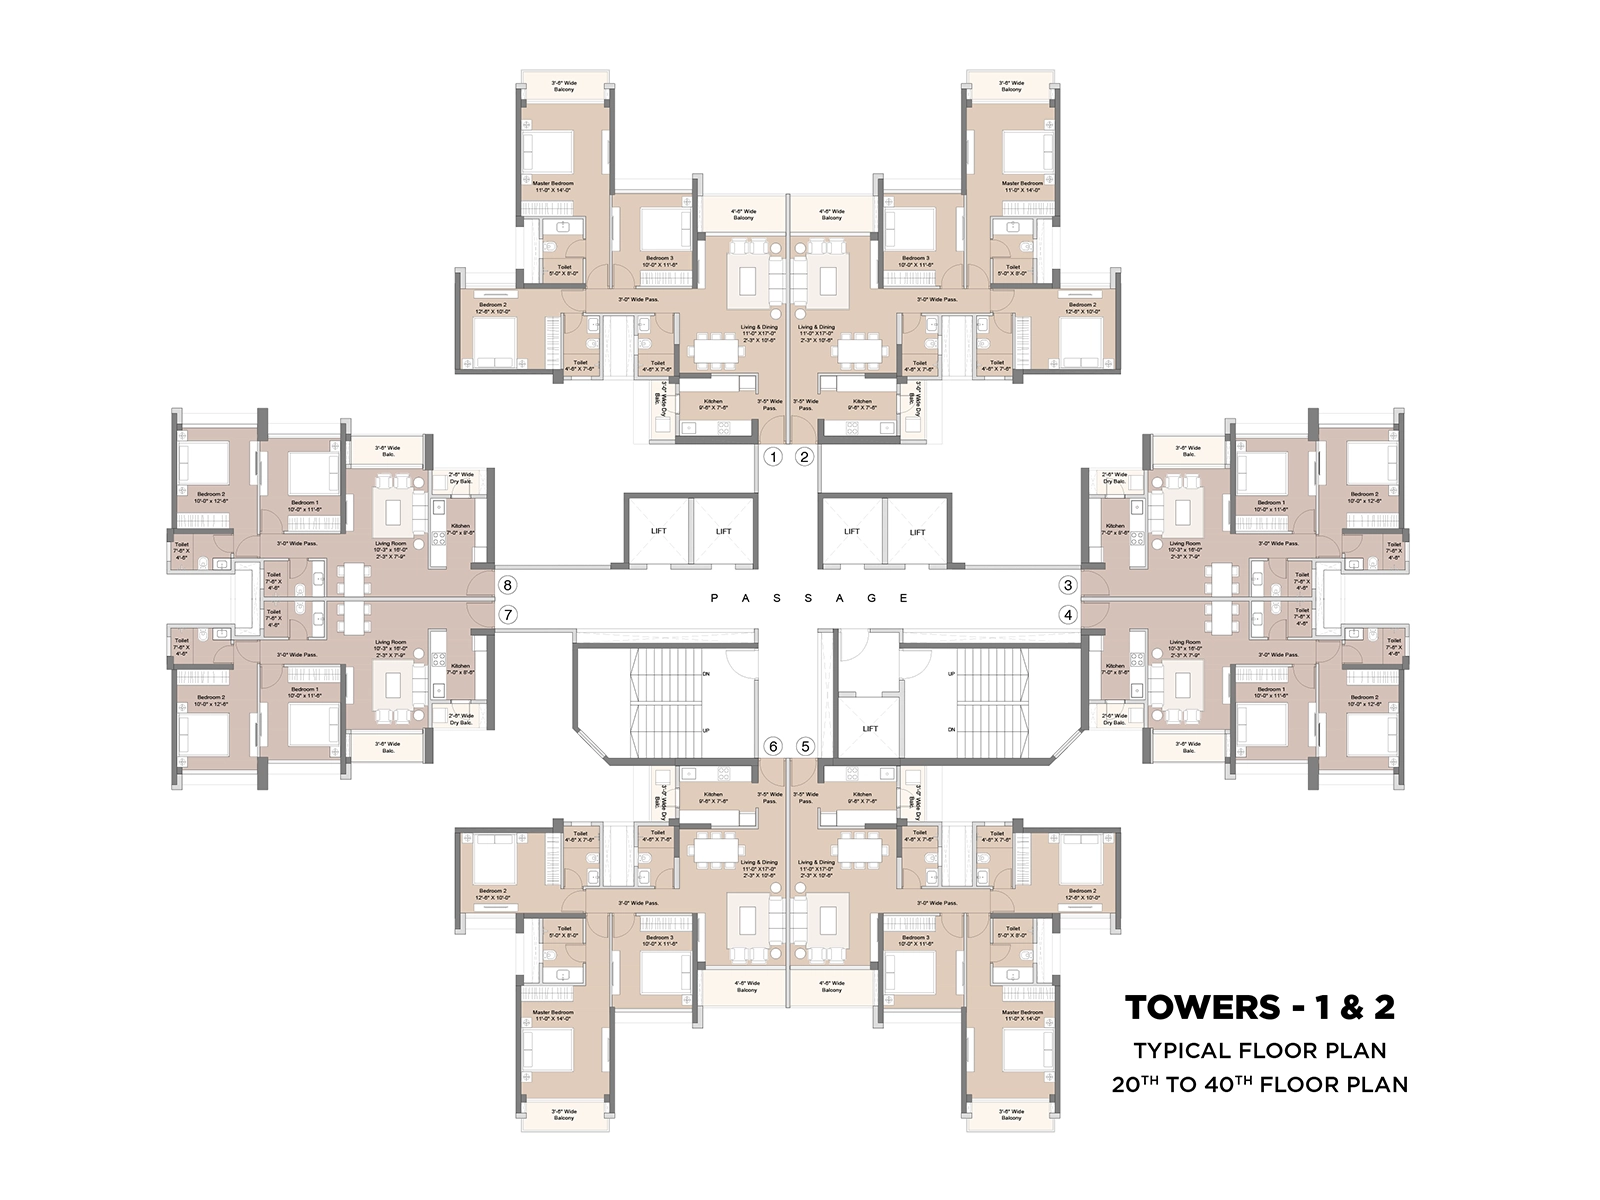 20th to 40th Floor Plan